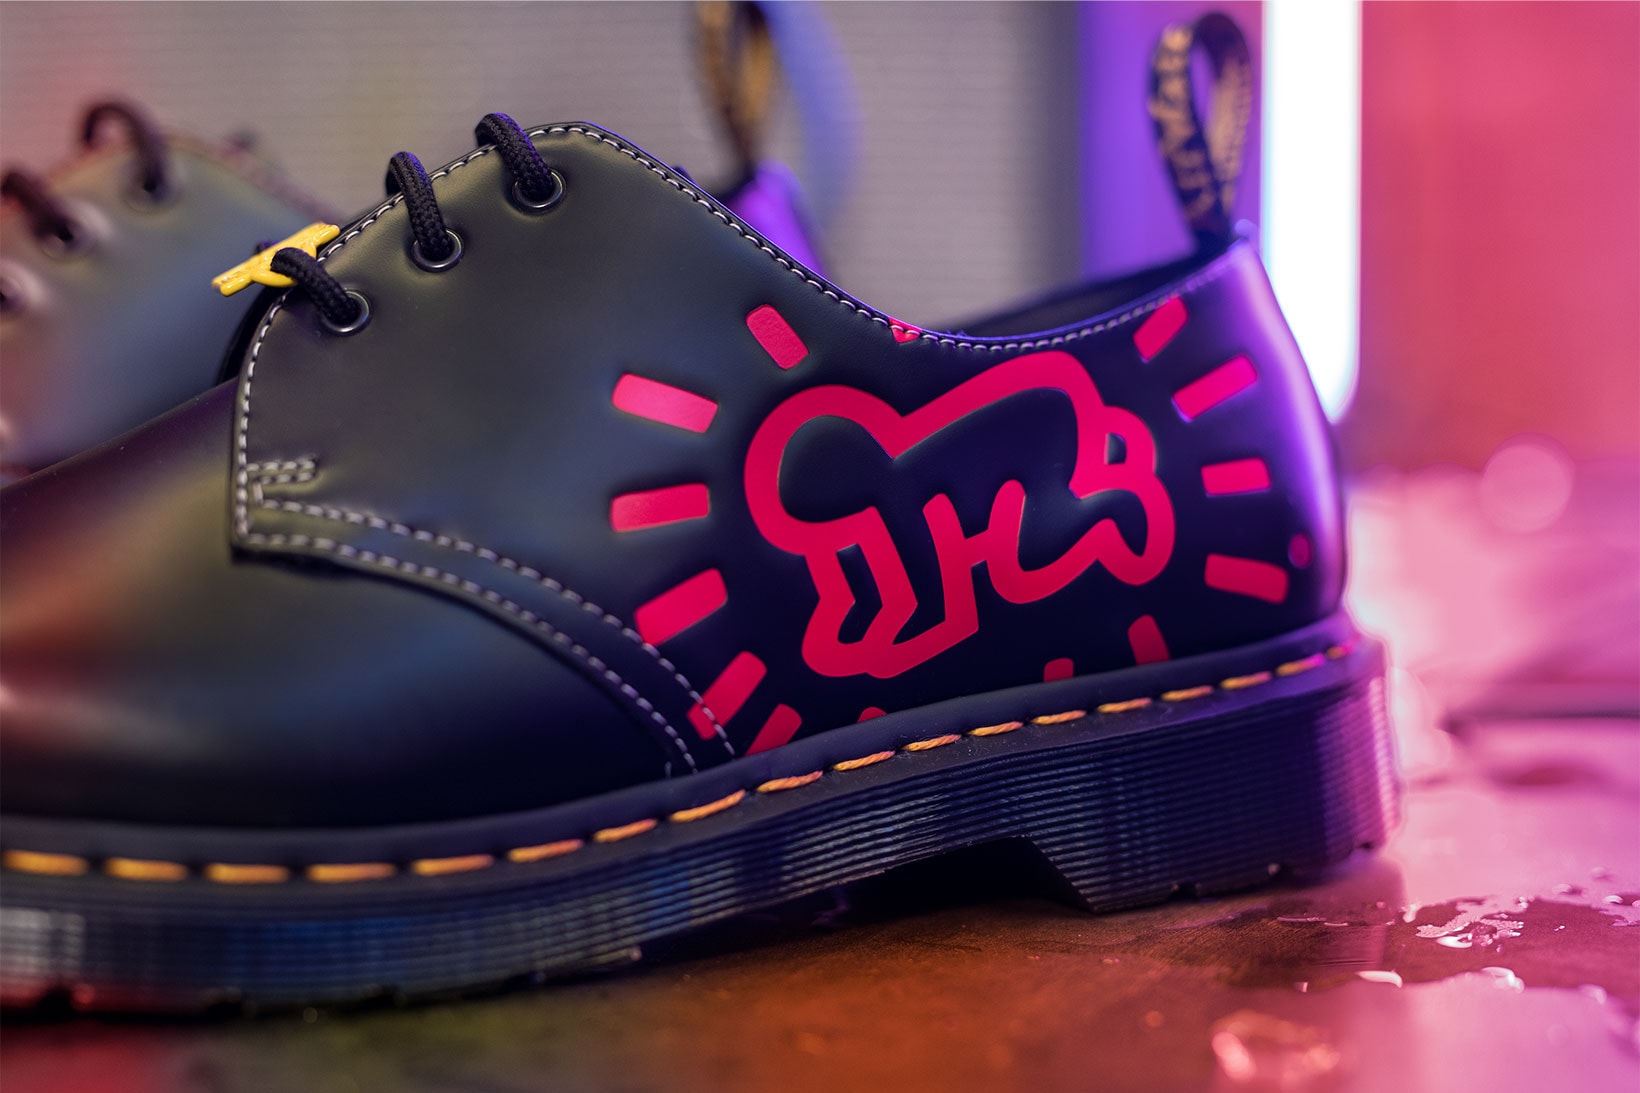 Dr. Martens Keith Haring Collaboration Boots Shoes 1461 Derby Pink Illustrations Drawings Art